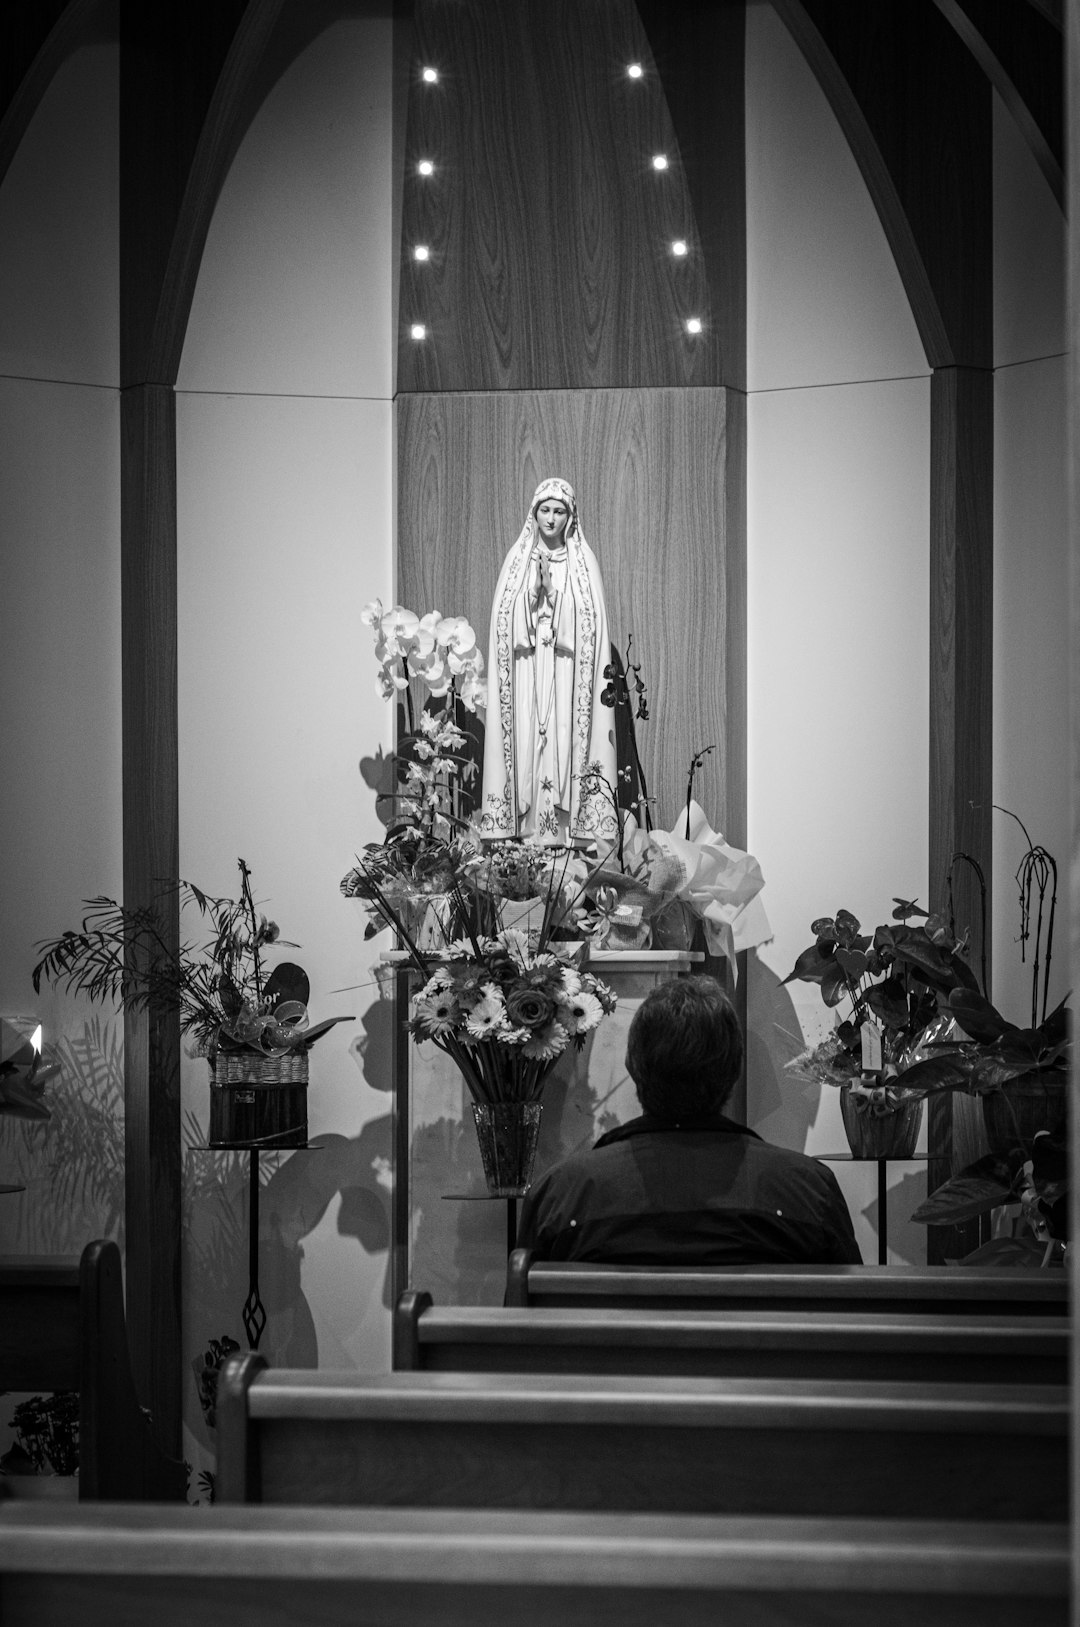 grayscale photography of person sitting in front of religious figure